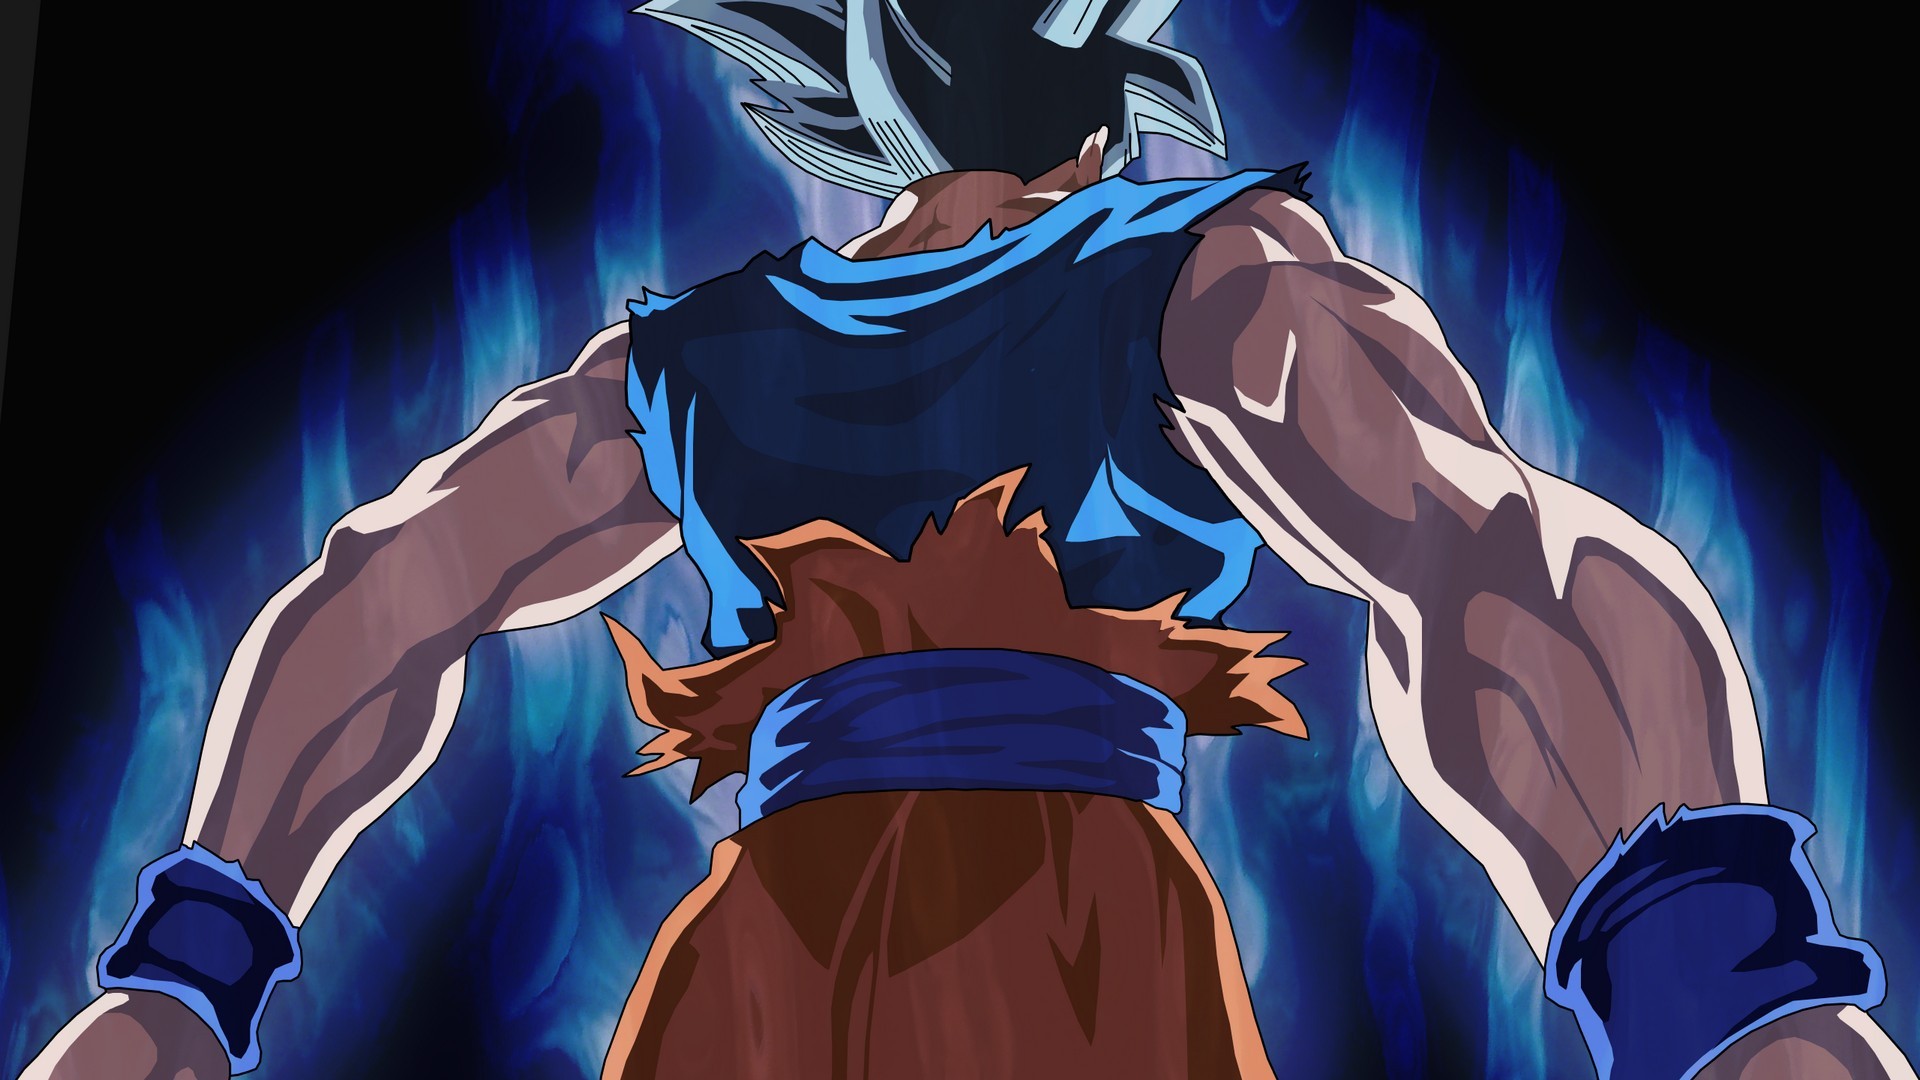 Goku Images Wallpaper with resolution 1920X1080 pixel. You can use this wallpaper as background for your desktop Computer Screensavers, Android or iPhone smartphones